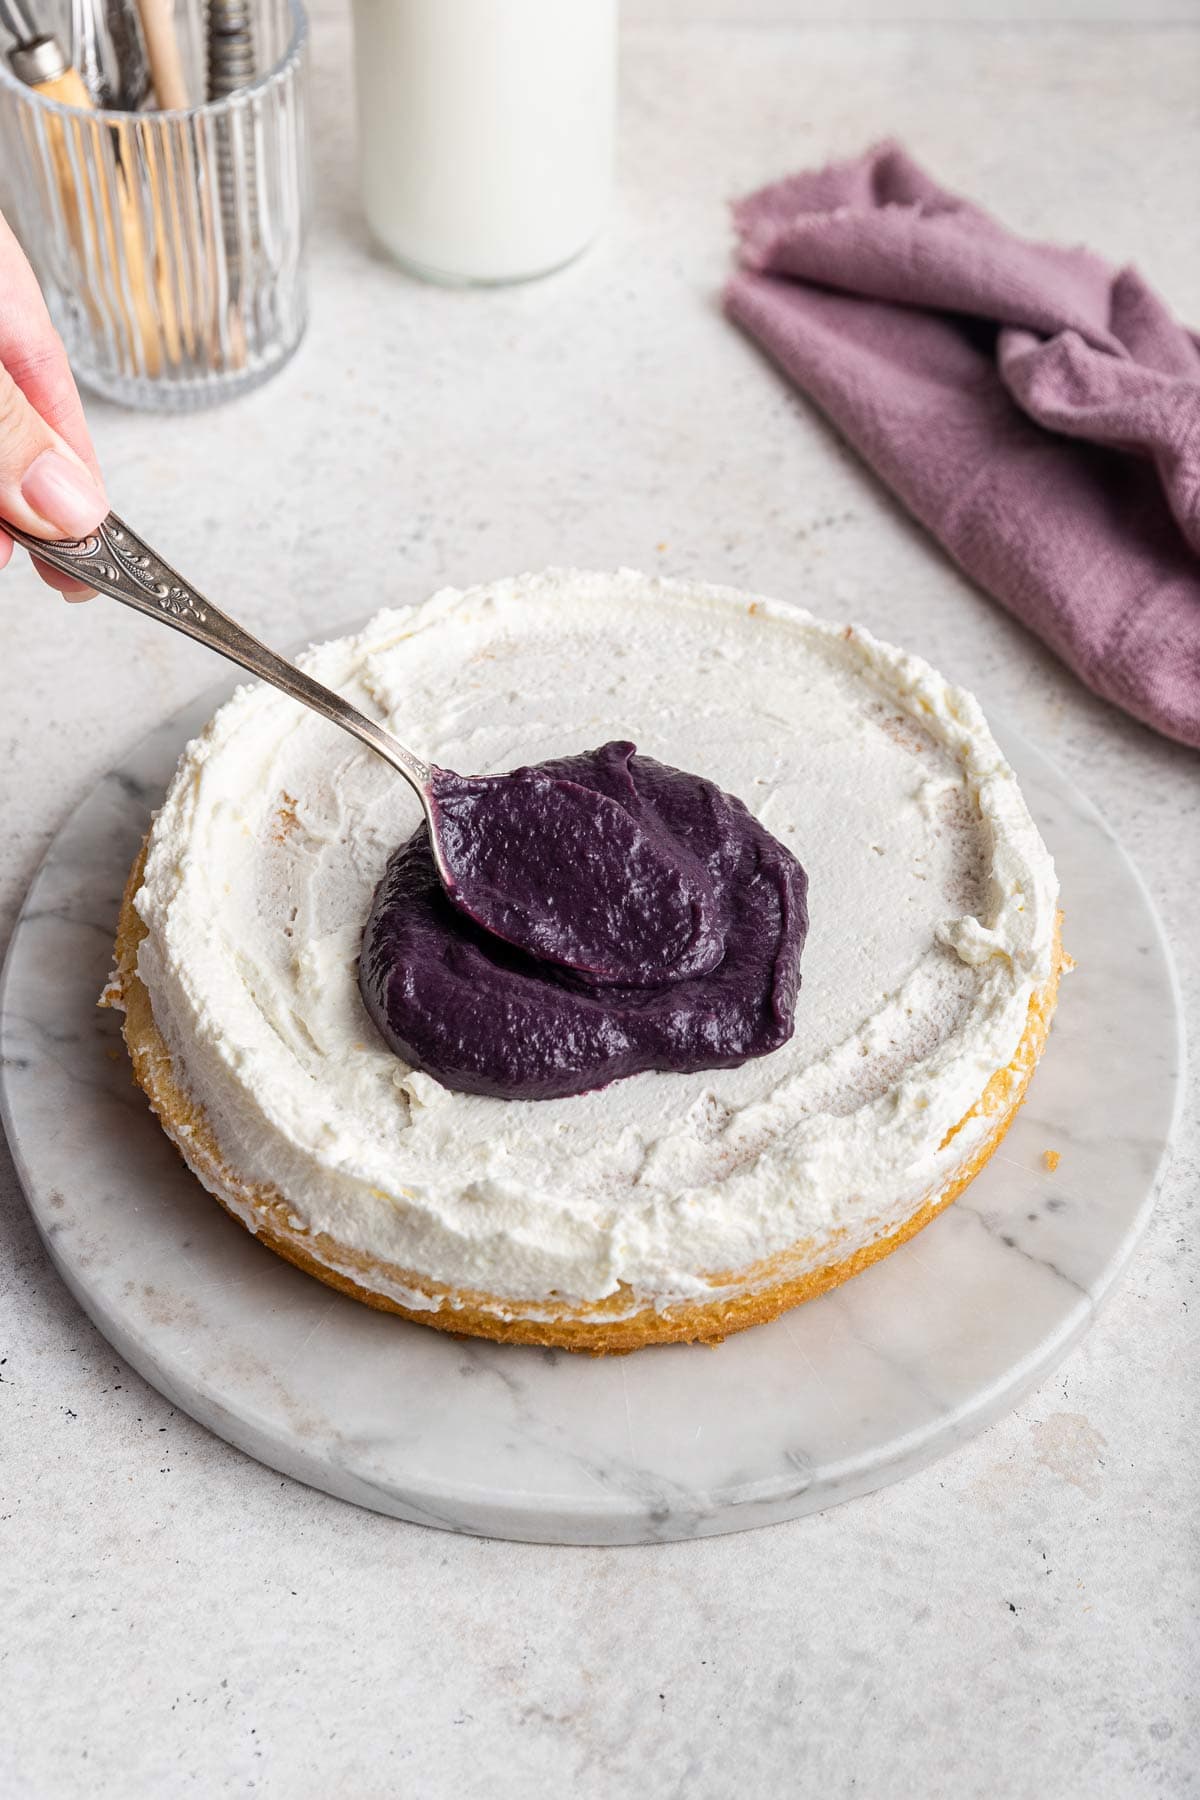 dolloping blueberry curd on top of a layer of cake